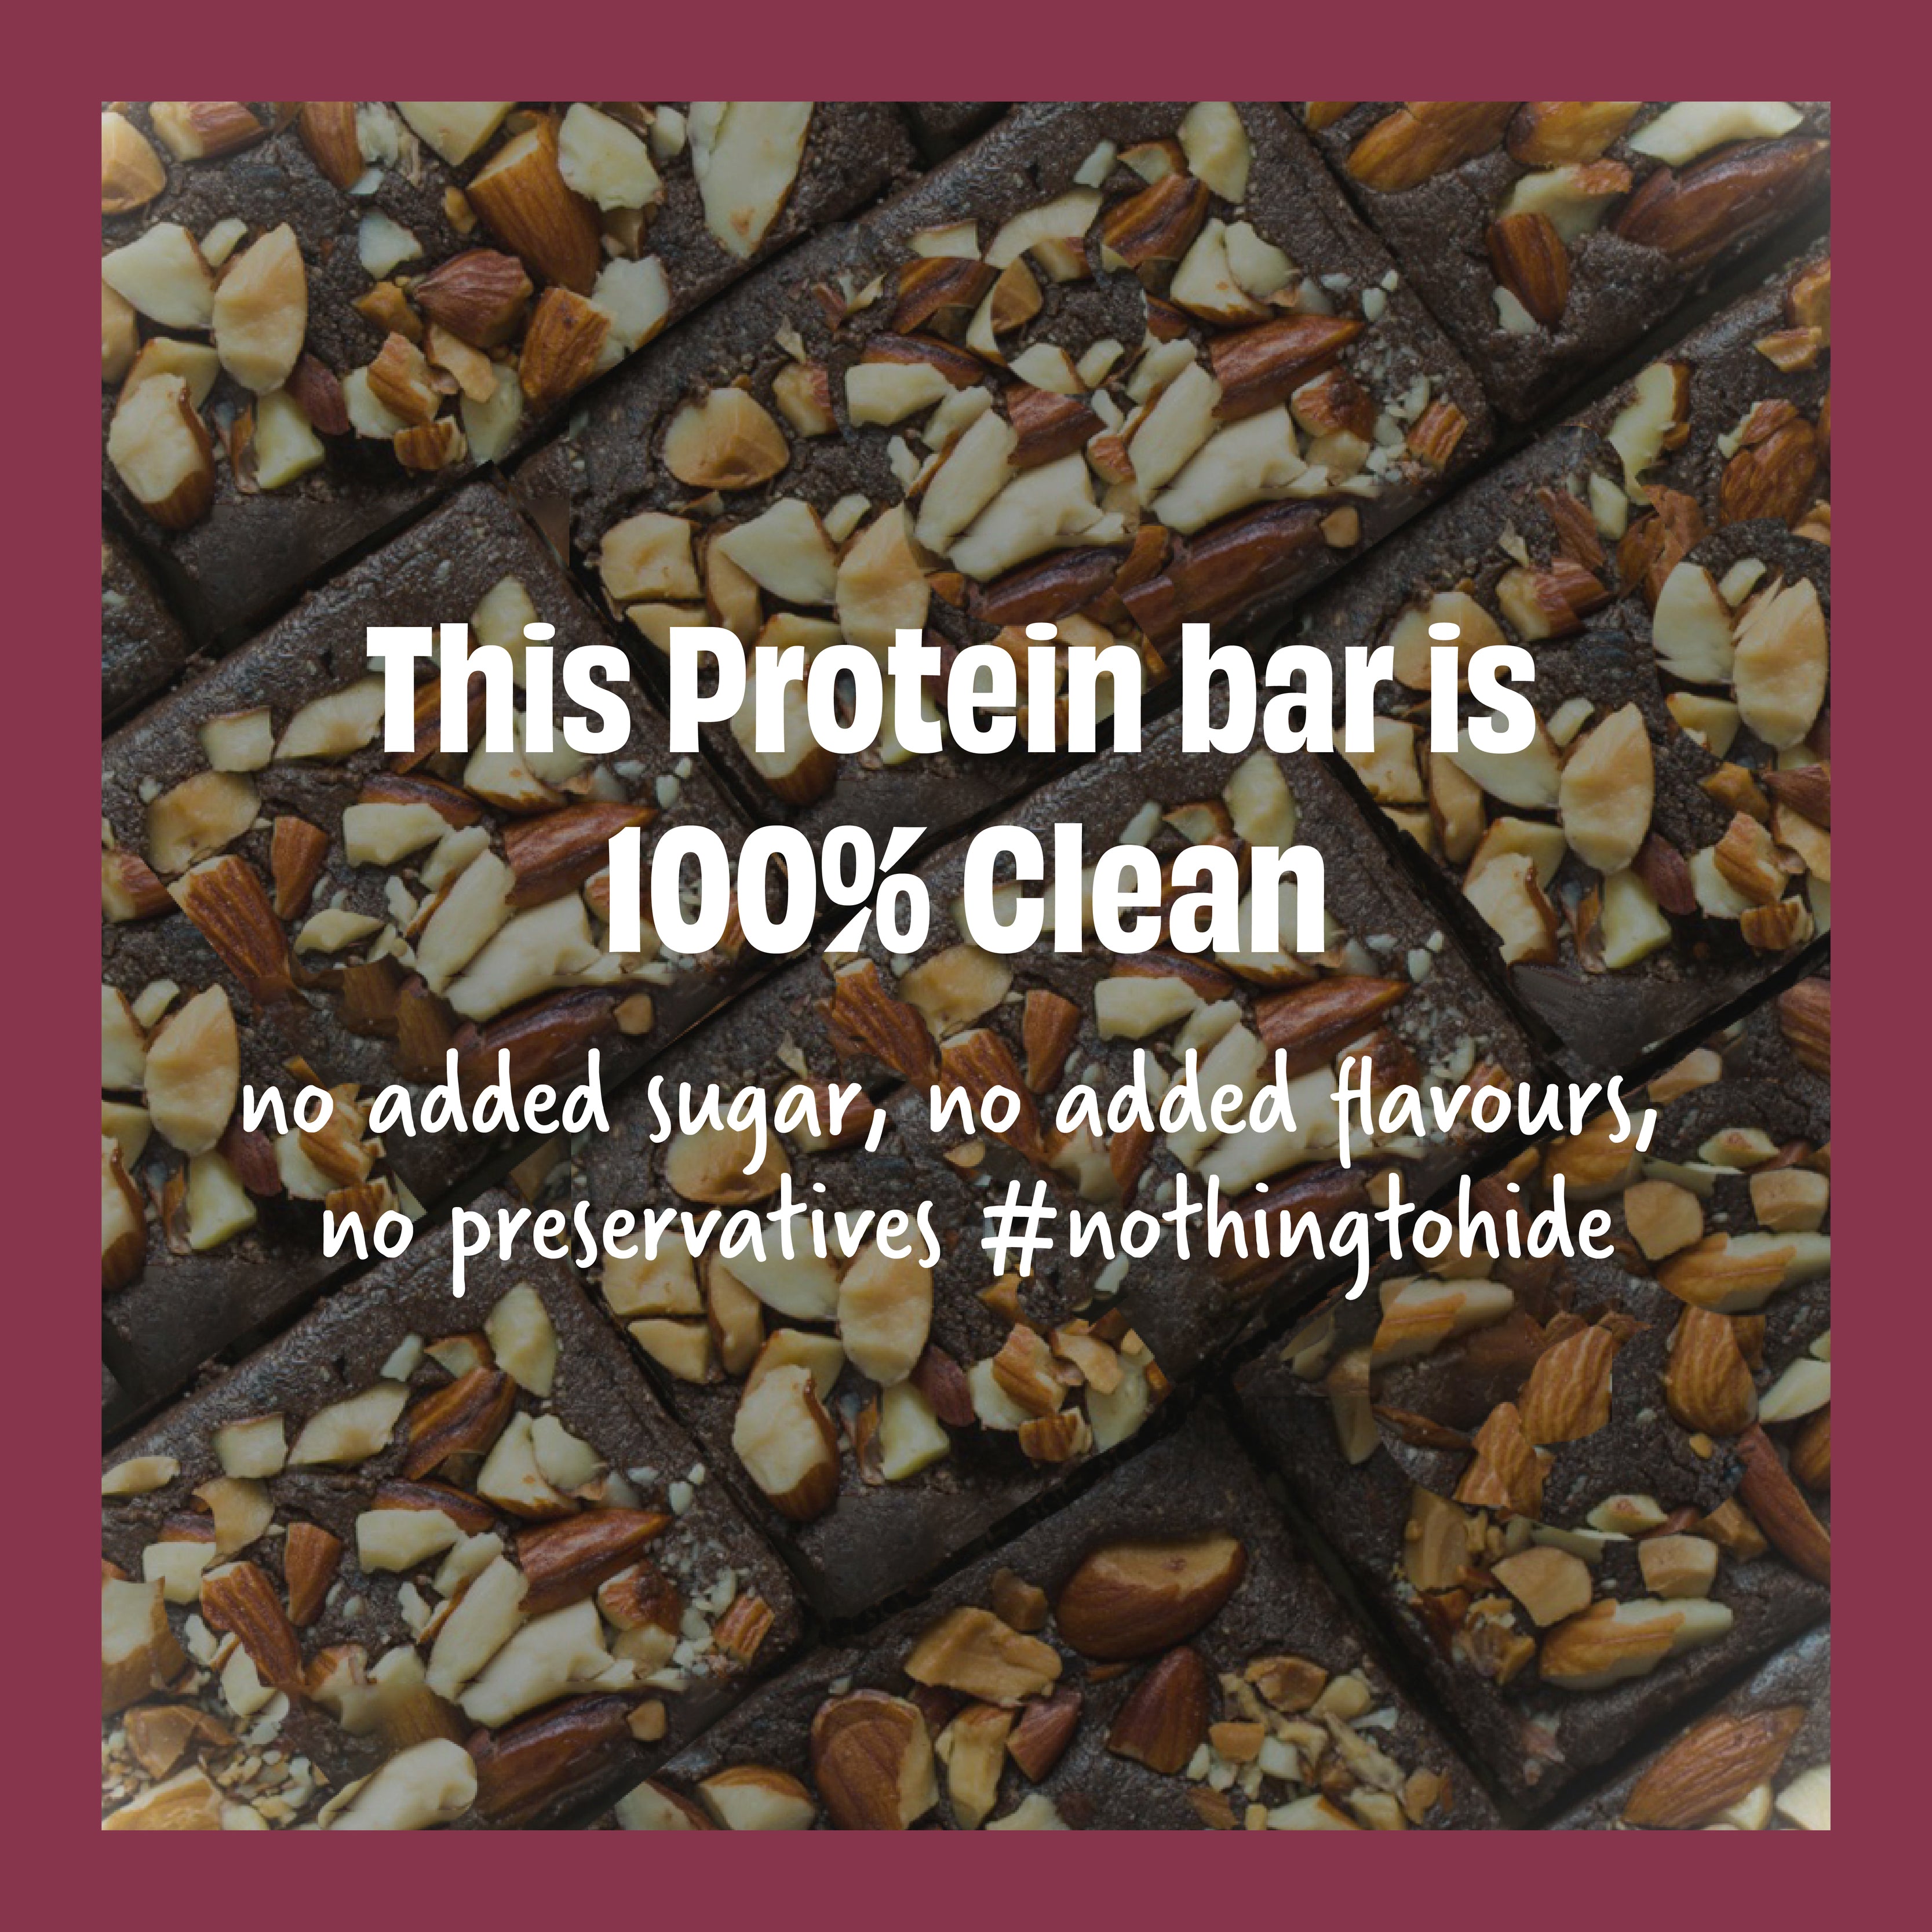 The Whole Truth - Protein Bars | All-in-One | Pack of 6 x 52 g each | No Added Sugar | No Preservatives | No Artificial Sweeteners | No Gluten or Soy | All Natural Ingredients | Six Different Flavours